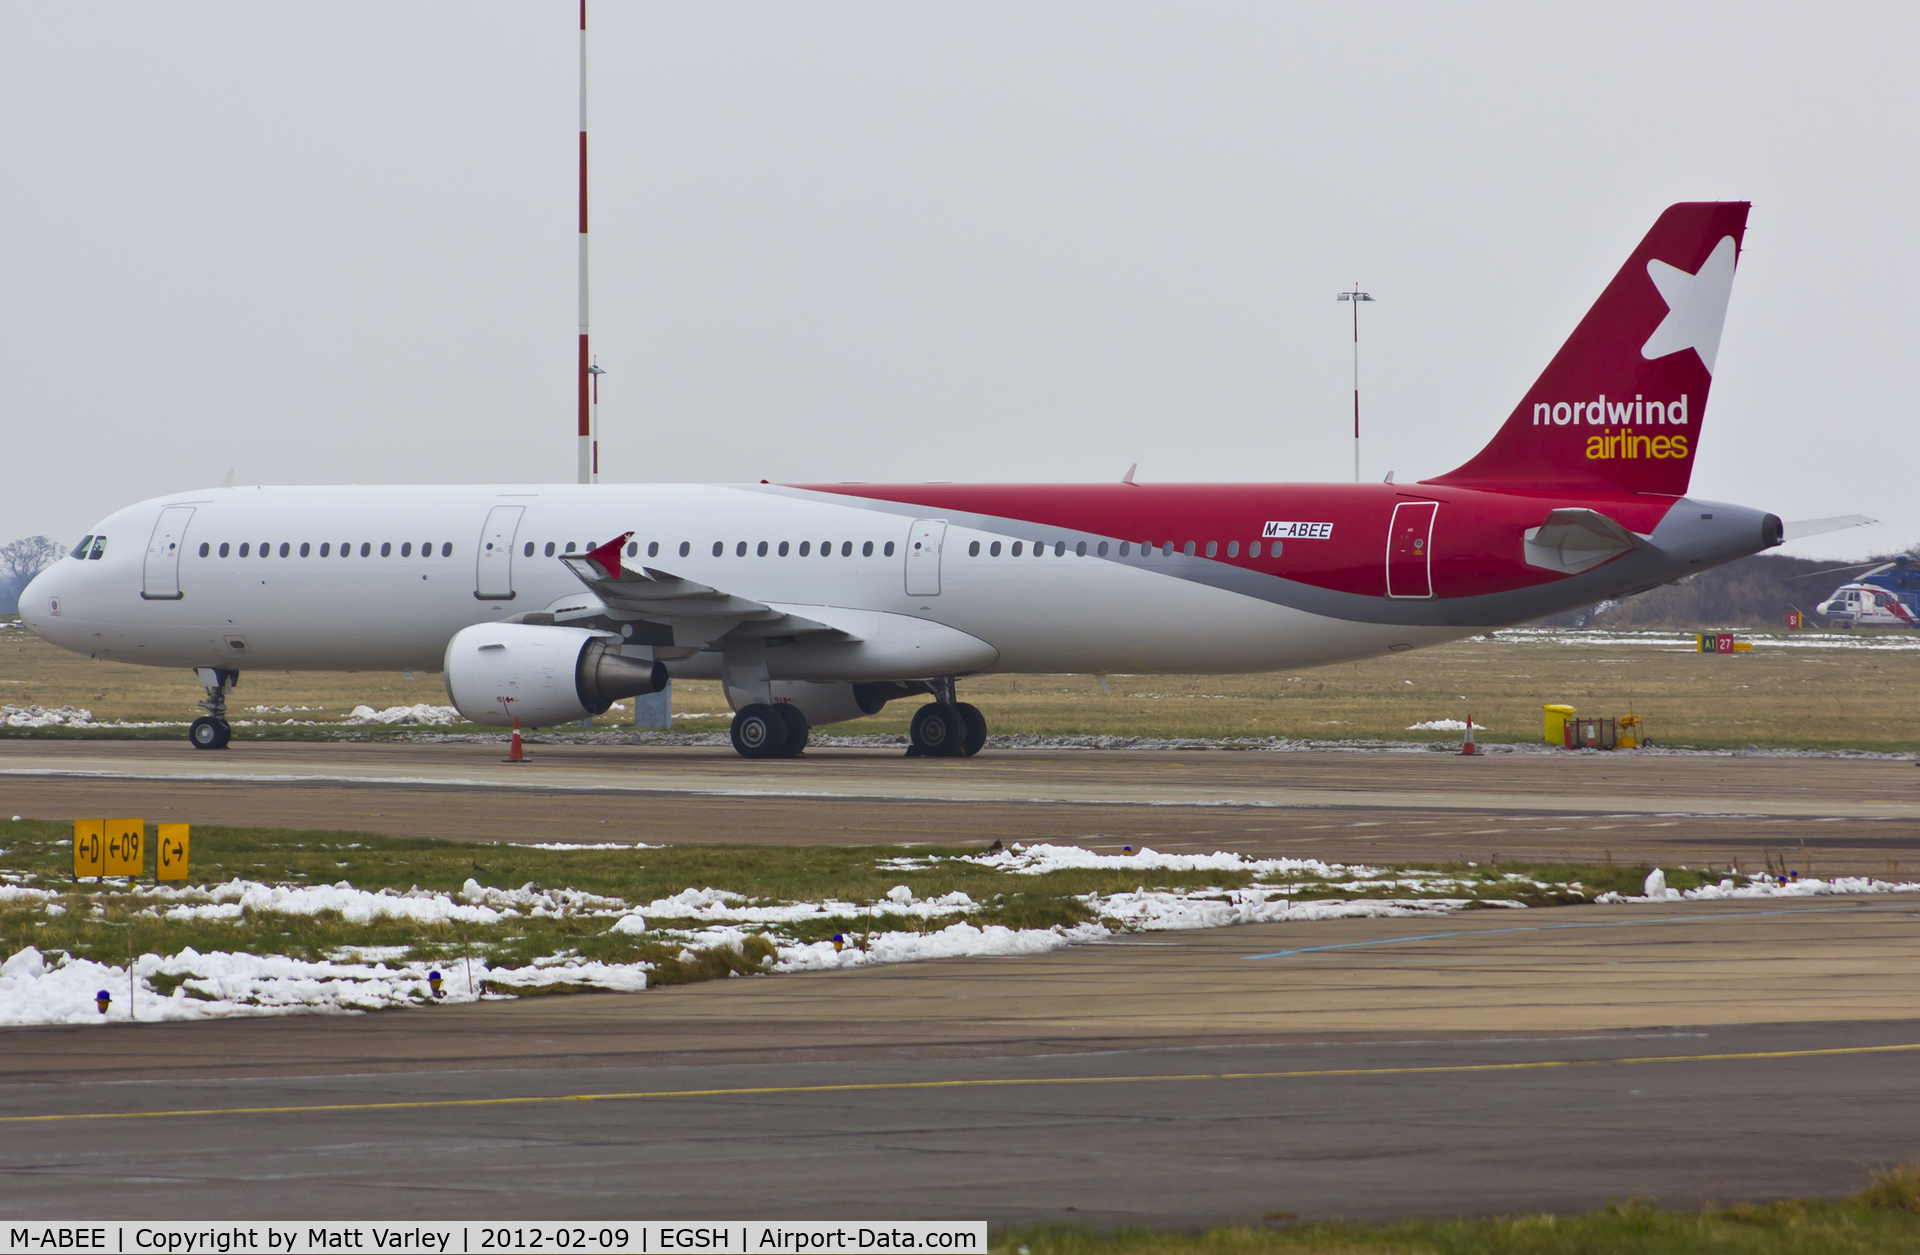 M-ABEE, 2000 Airbus A321-211 C/N 1233, Sat on stand 8 after spray into Nordwind Airlines livery.